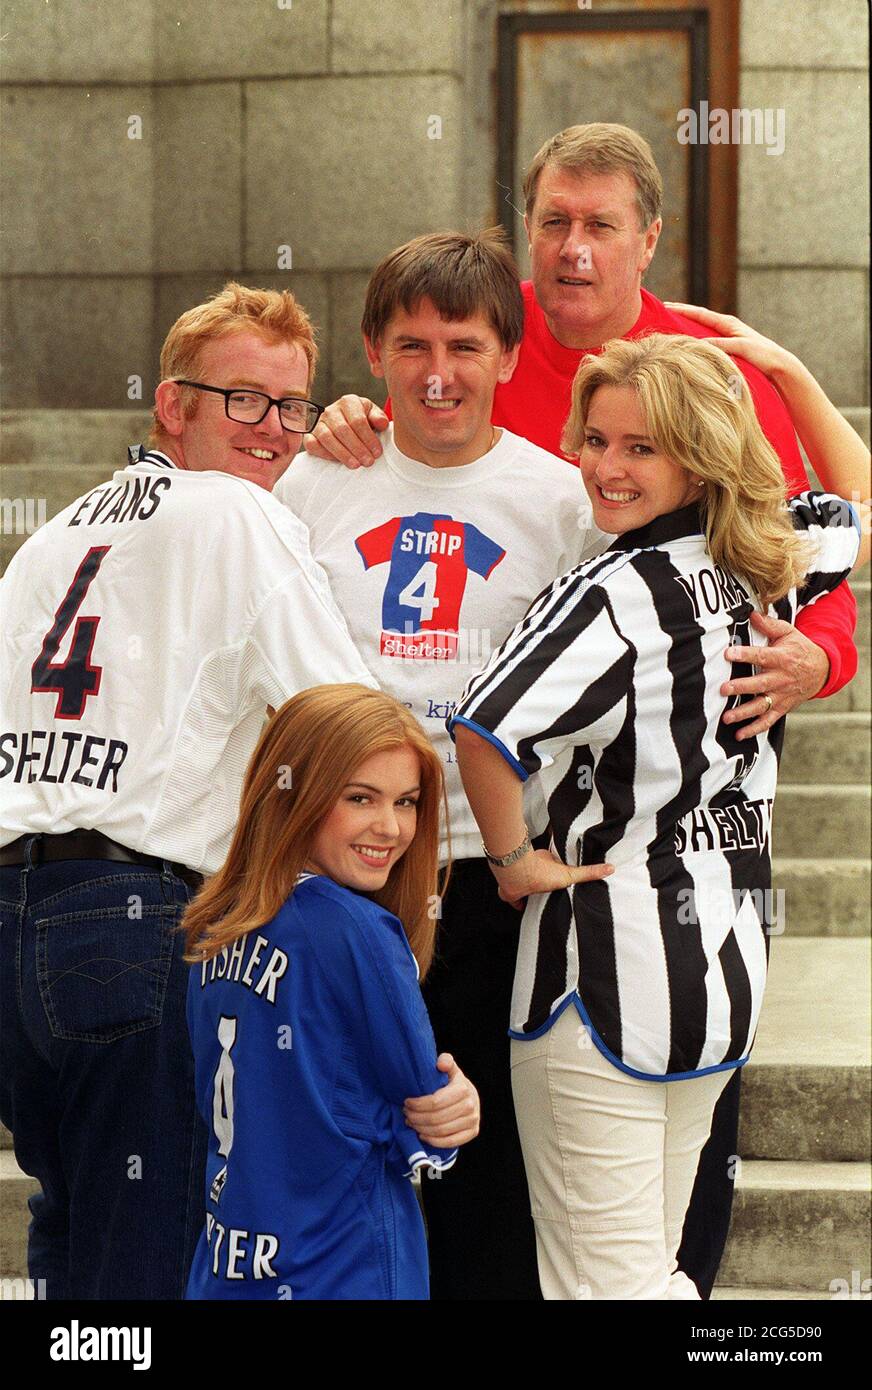 Former England soccer stars Peter Beardsley (centre) and Sir Geoff Hurst with TV sports presenter Gabby Yorath (right) and Virgin radio boss Chris Evans (left) and actress Isla Fisher, during a photocall at the FA Premier League Hall of Fame in London. * to launch Strip 4 Shelter, a new fundraising day for Shelter, the UK's largest national charity working on behalf on the homeless. On Strip 4 Shelter day, which takes place on Friday 24 September, men and women all over the country will be able to join in the fun by contributing 2 (50p for school children) to wear their favourite team's Stock Photo